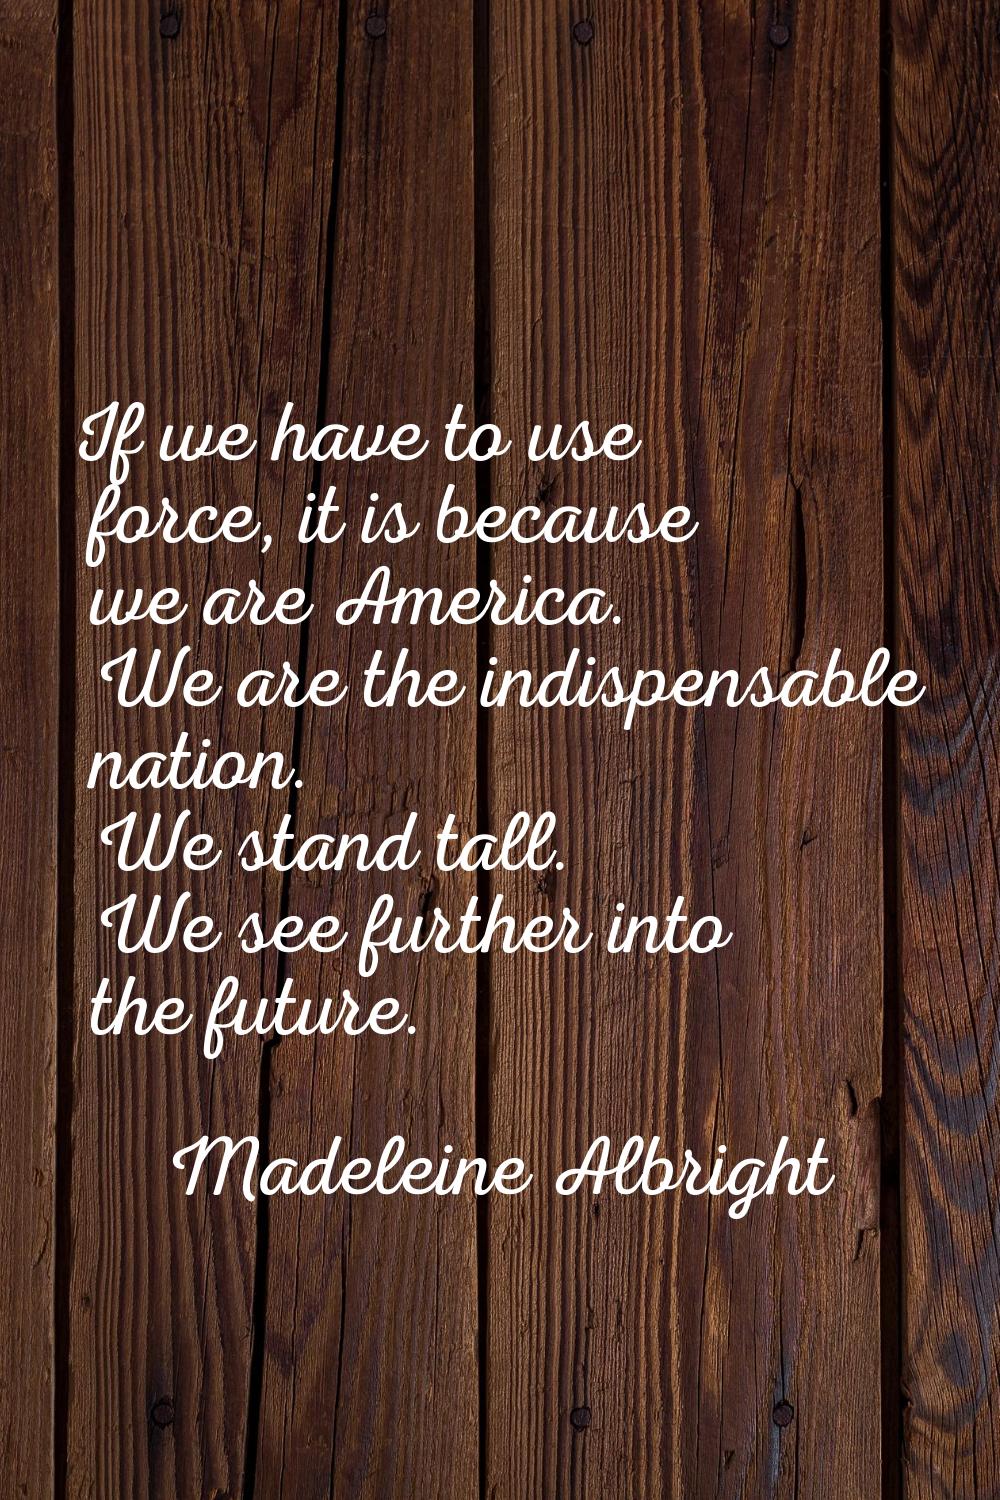 If we have to use force, it is because we are America. We are the indispensable nation. We stand ta